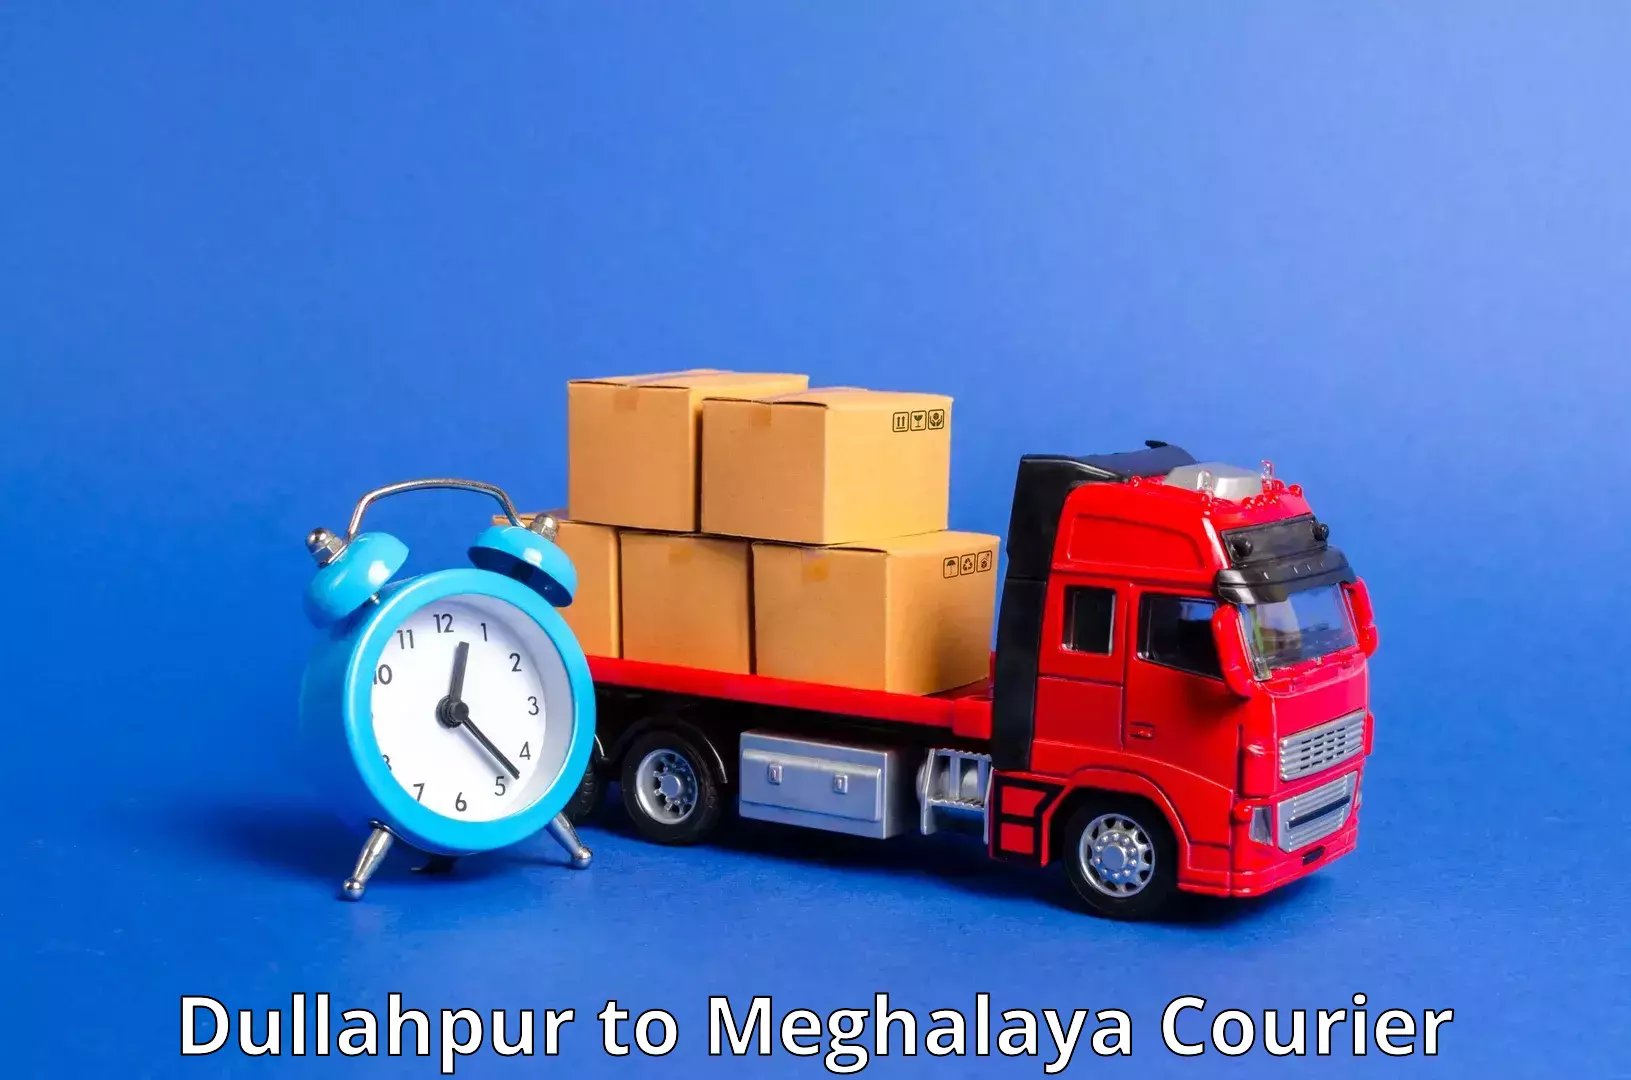 Courier service booking Dullahpur to Shillong